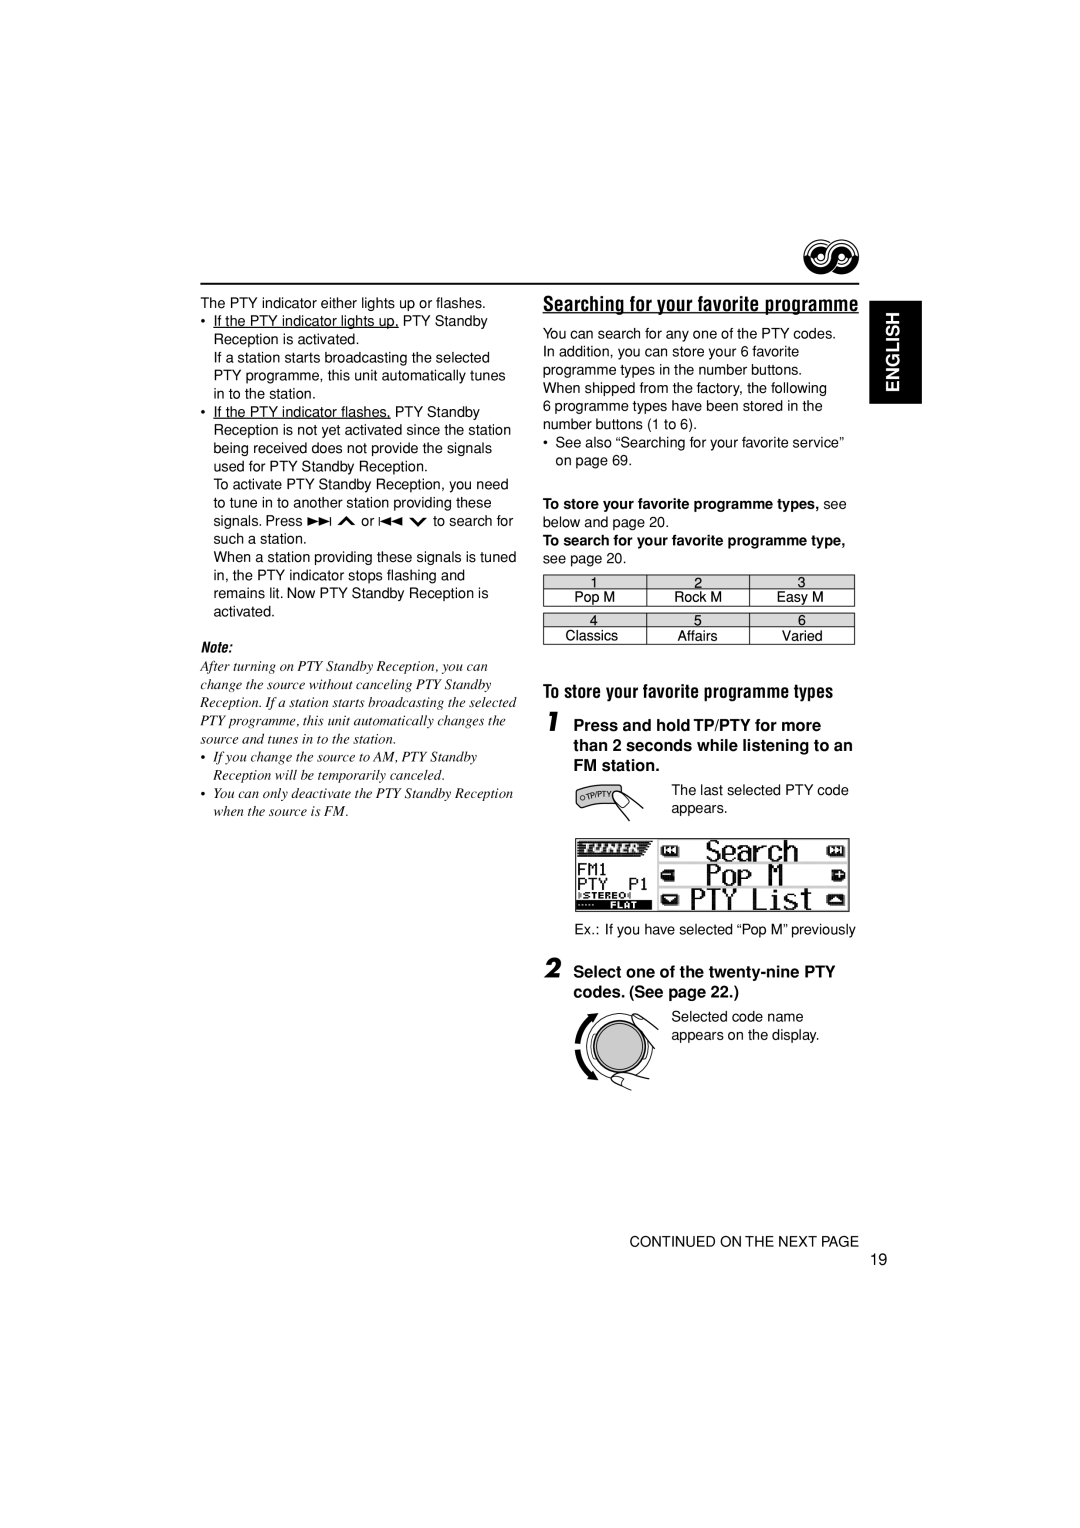 JVC KD-LH401 service manual Searching for your favorite programme, To store your favorite programme types, English 